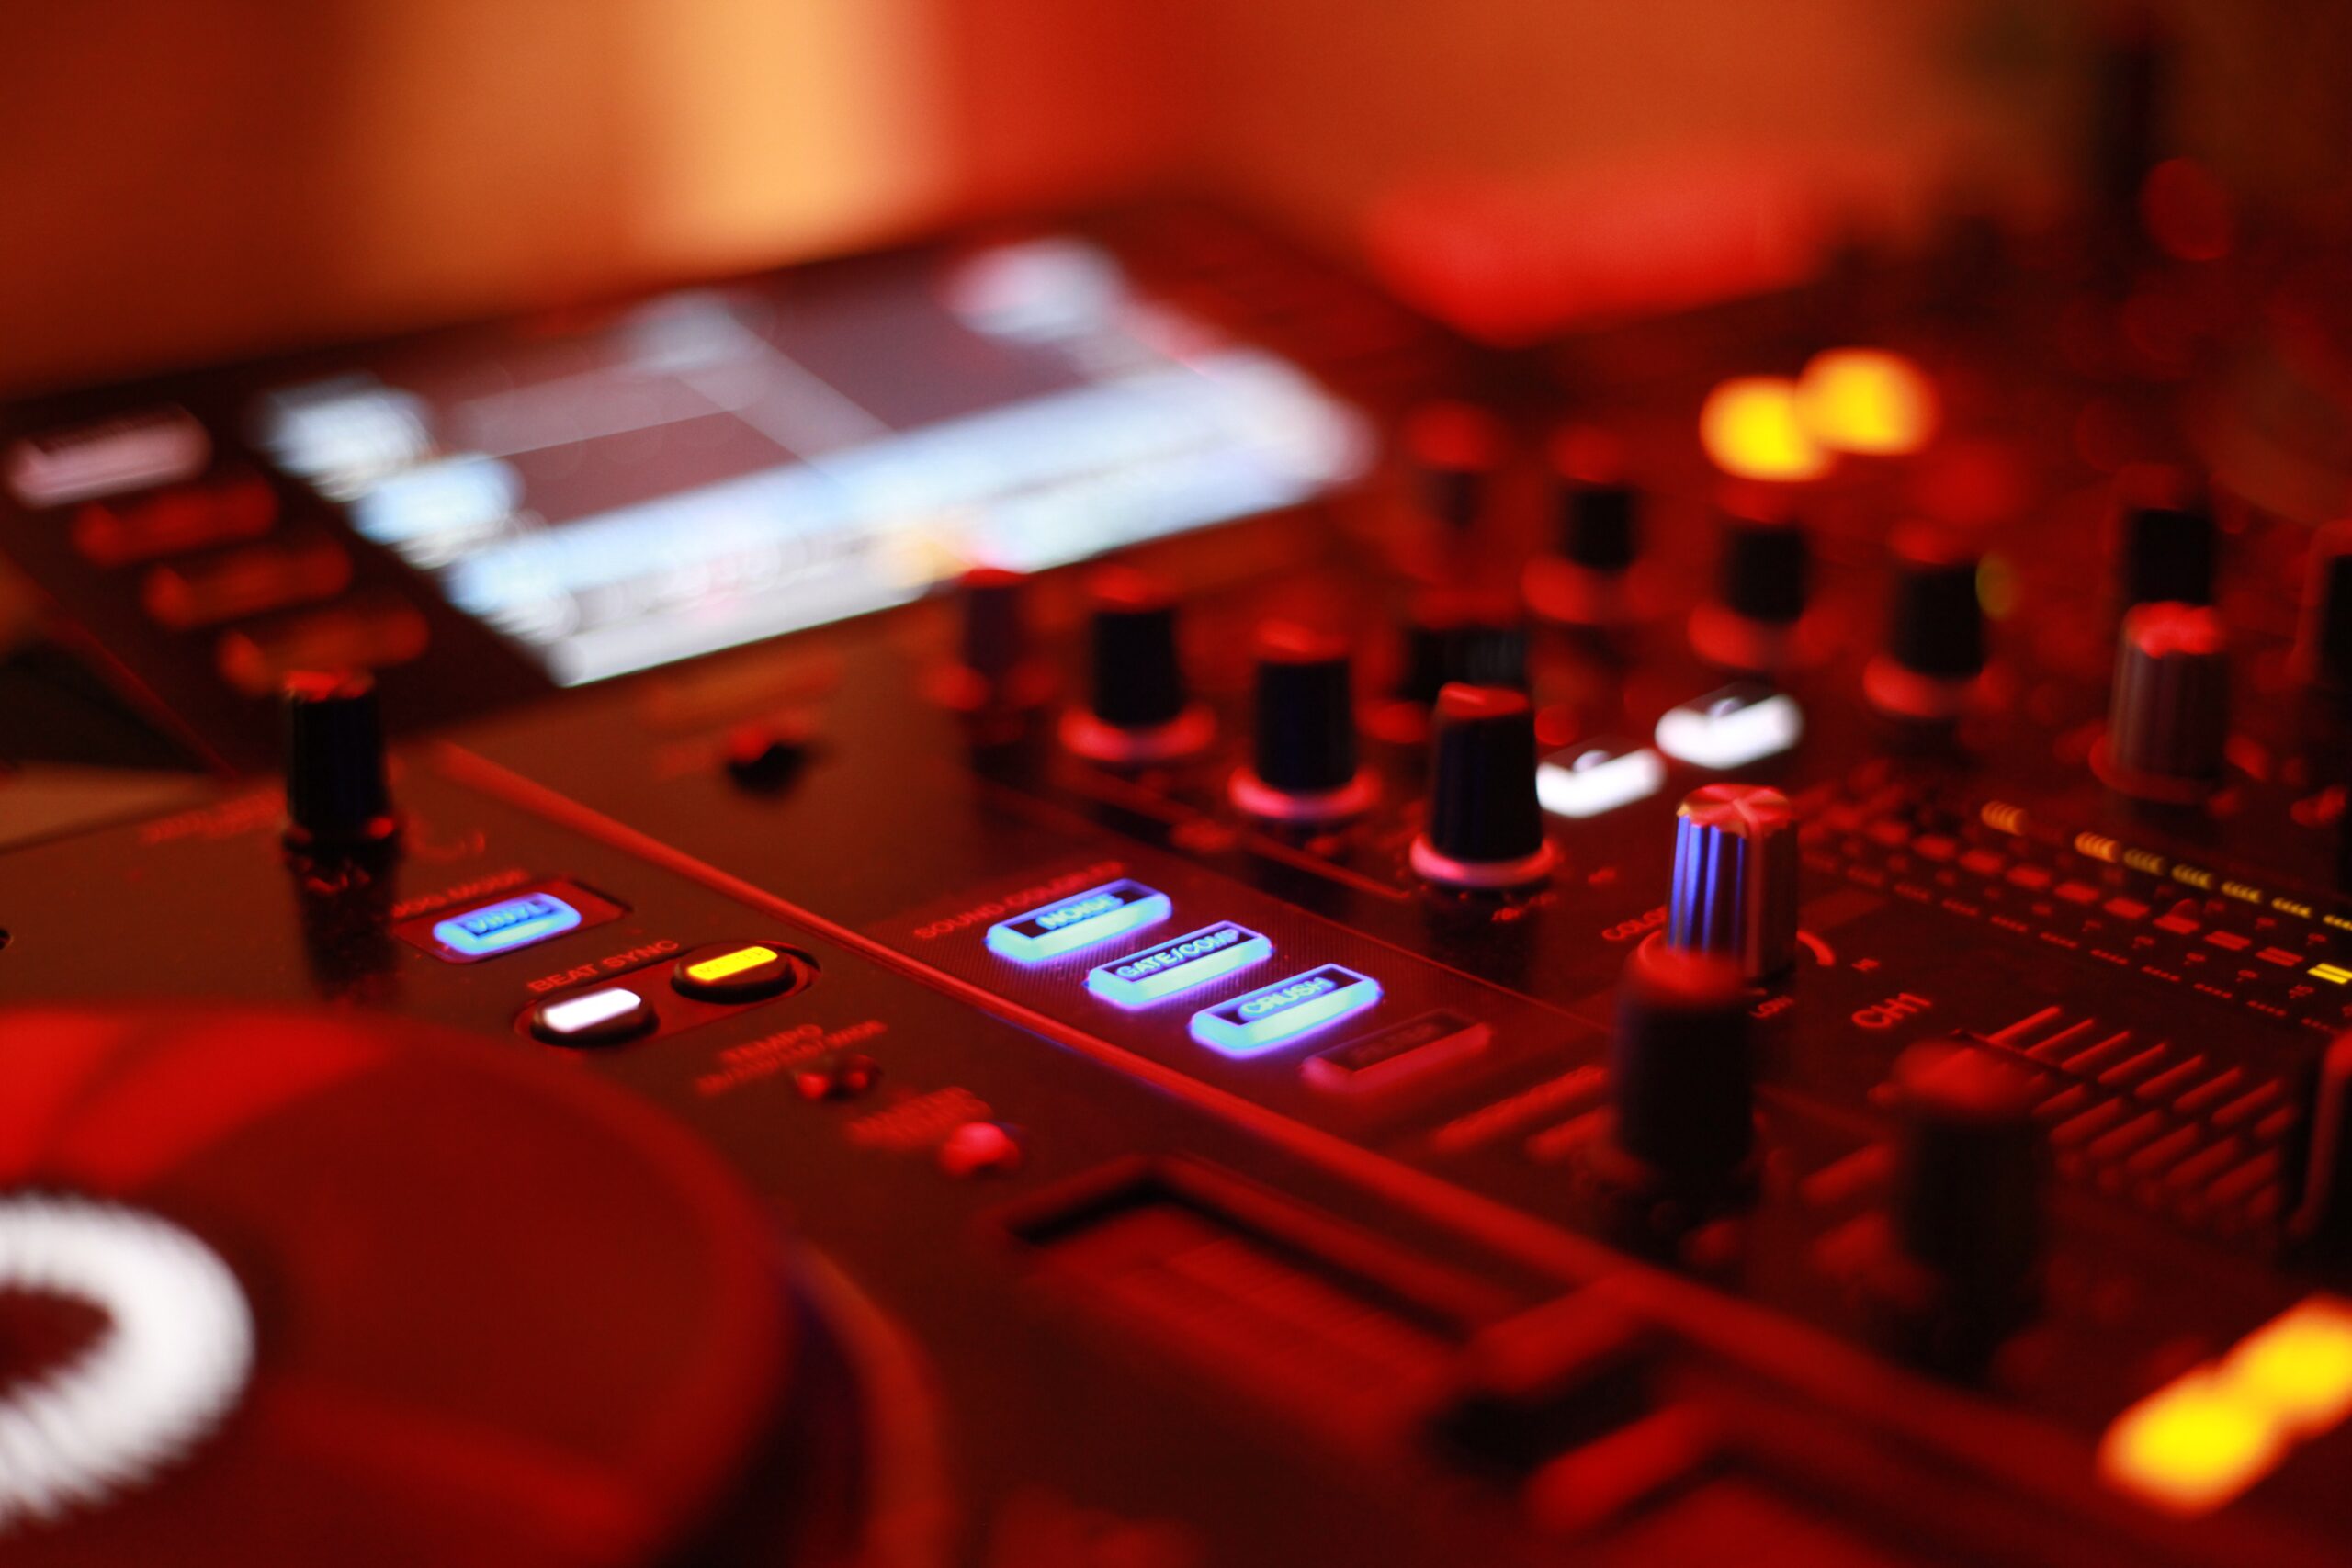 DJ Controllers vs. Turntables: Pros and Cons